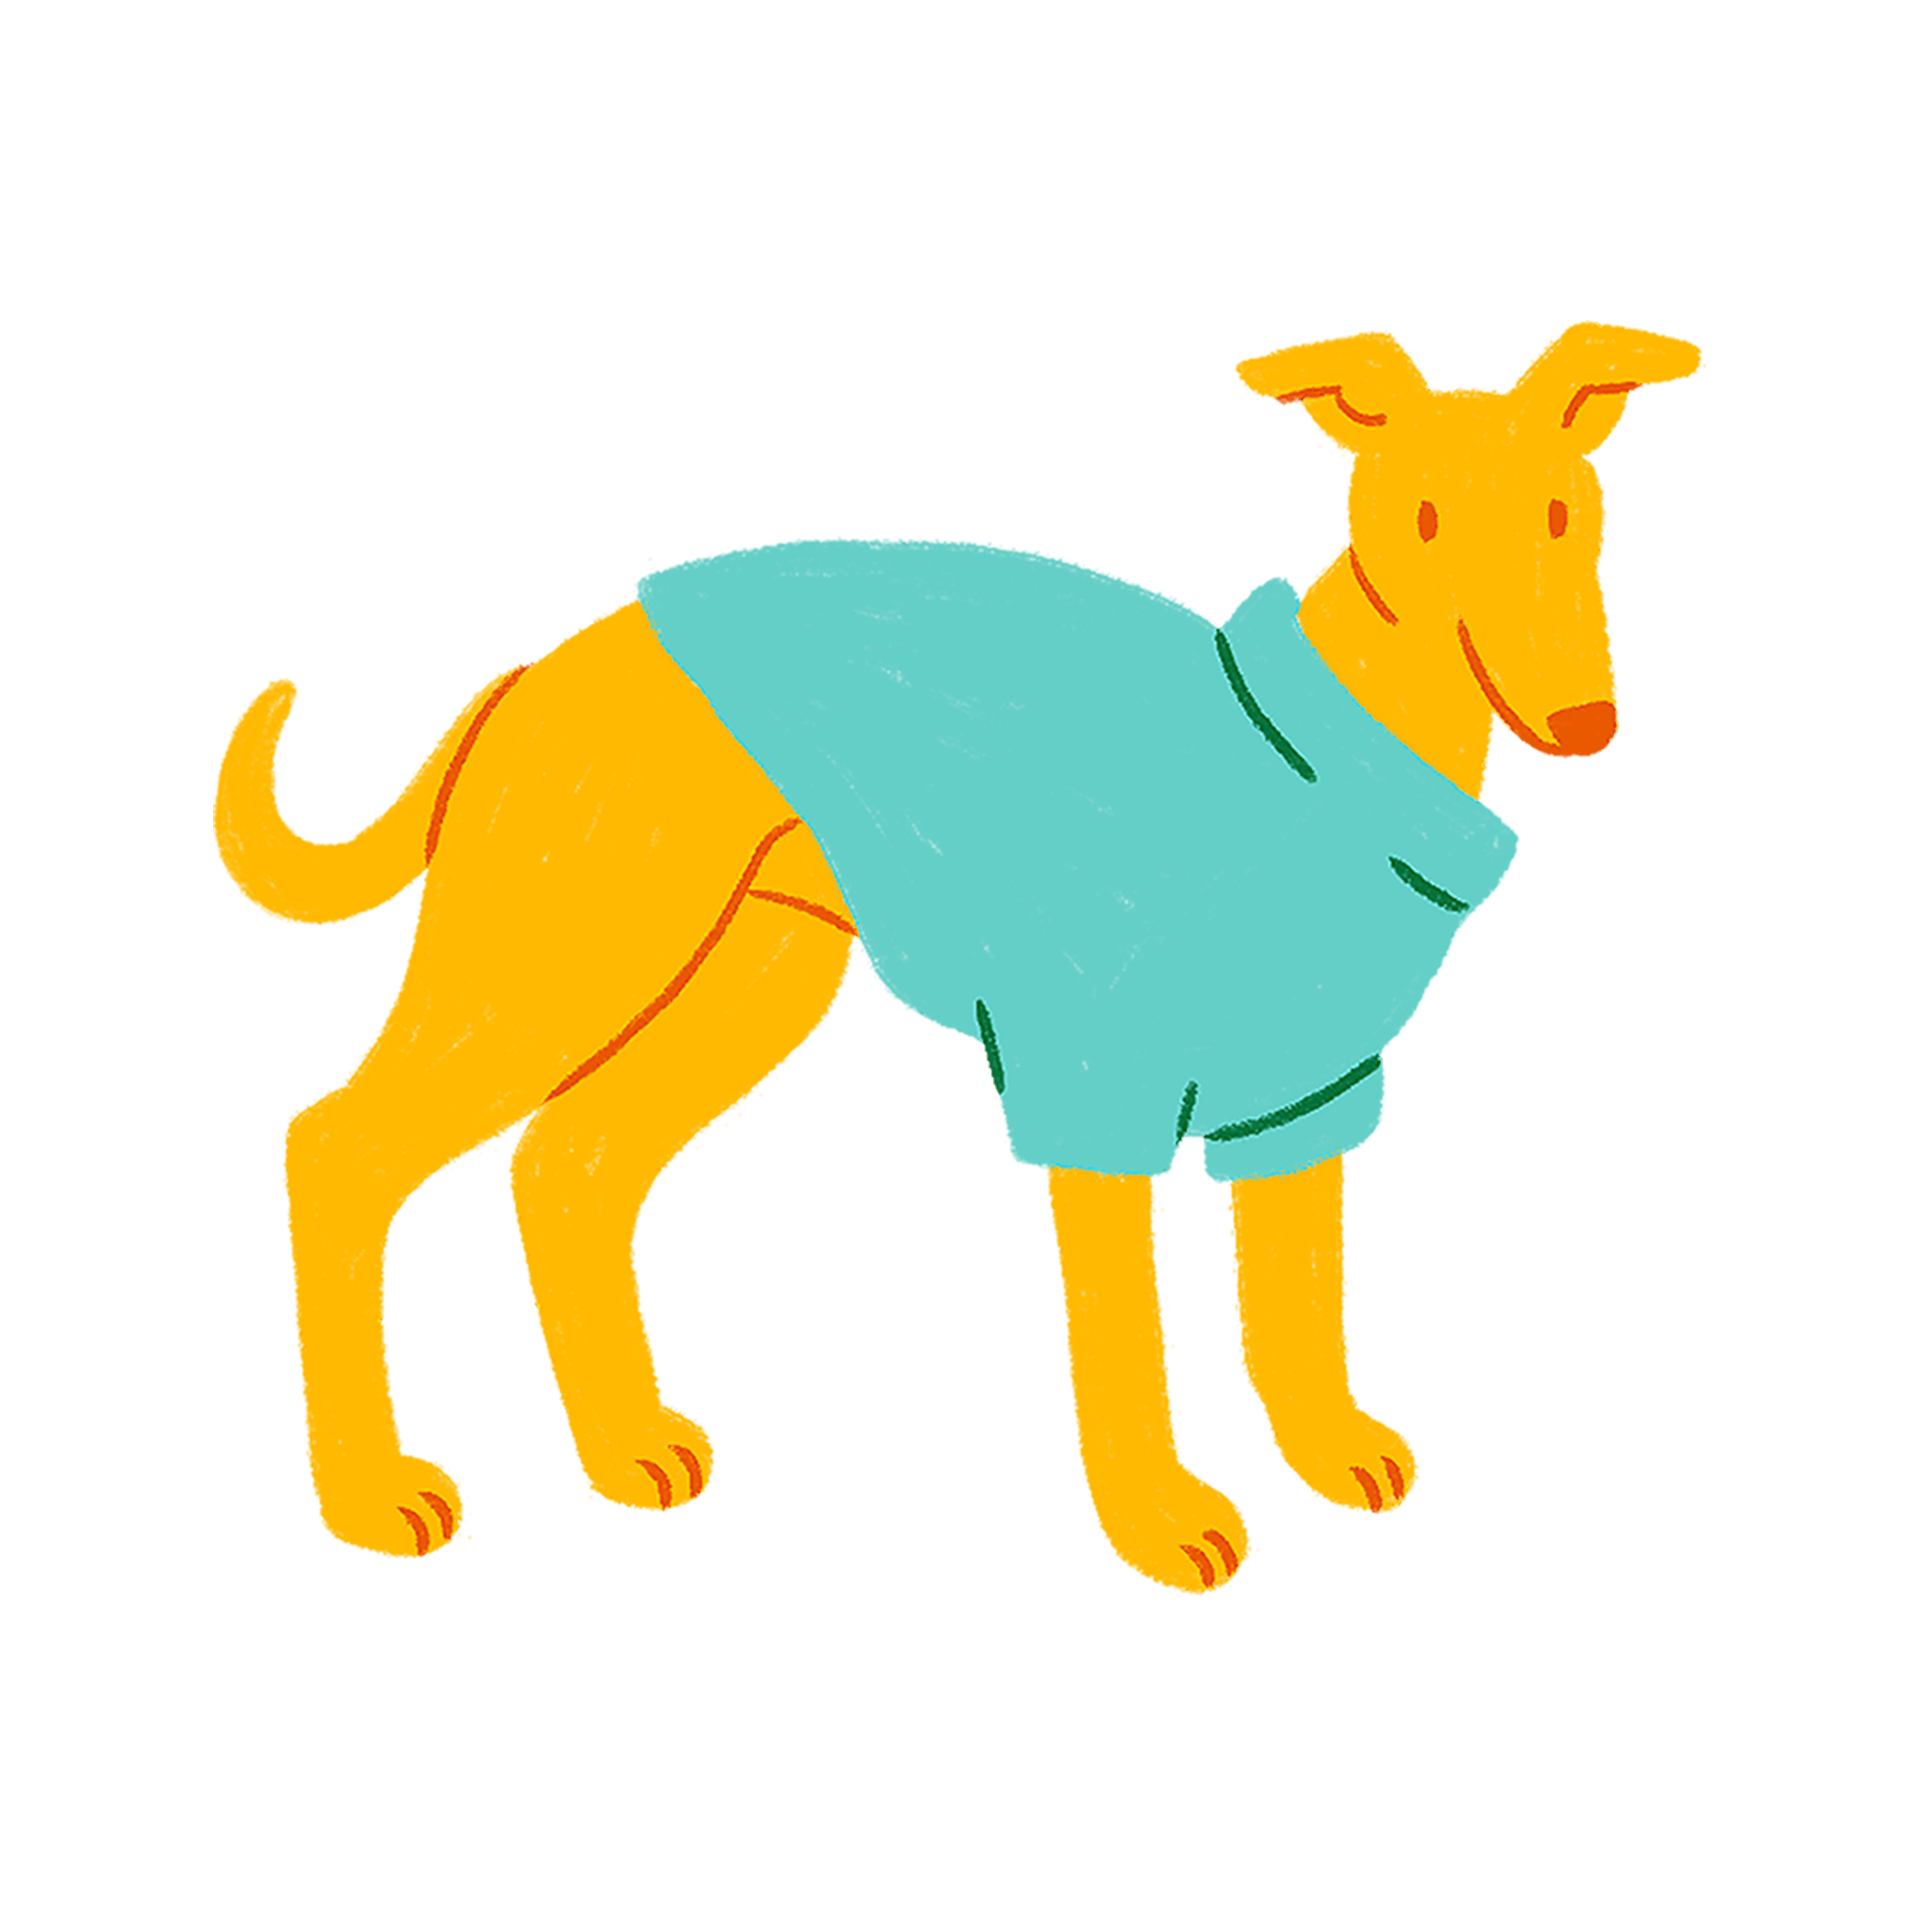 An illustration of a yellow dog in a blue sweater